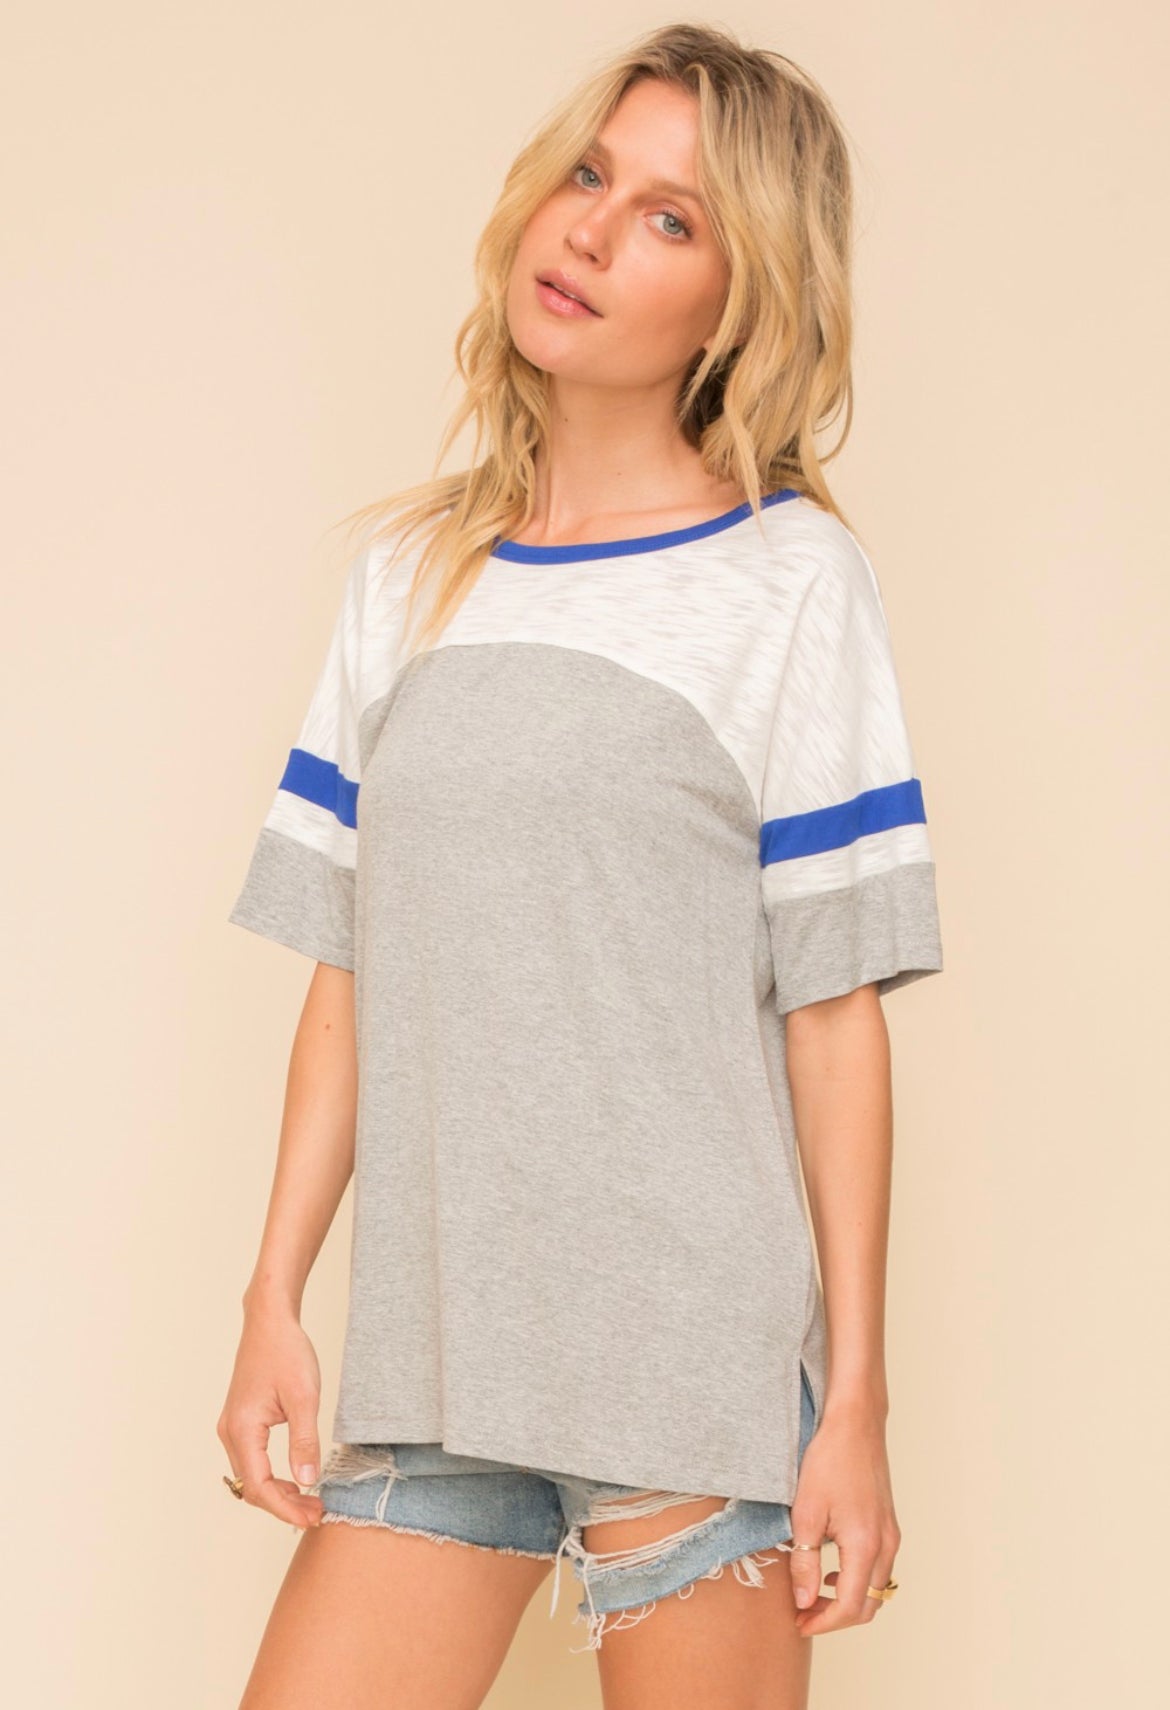 Blue grey and white color block tee